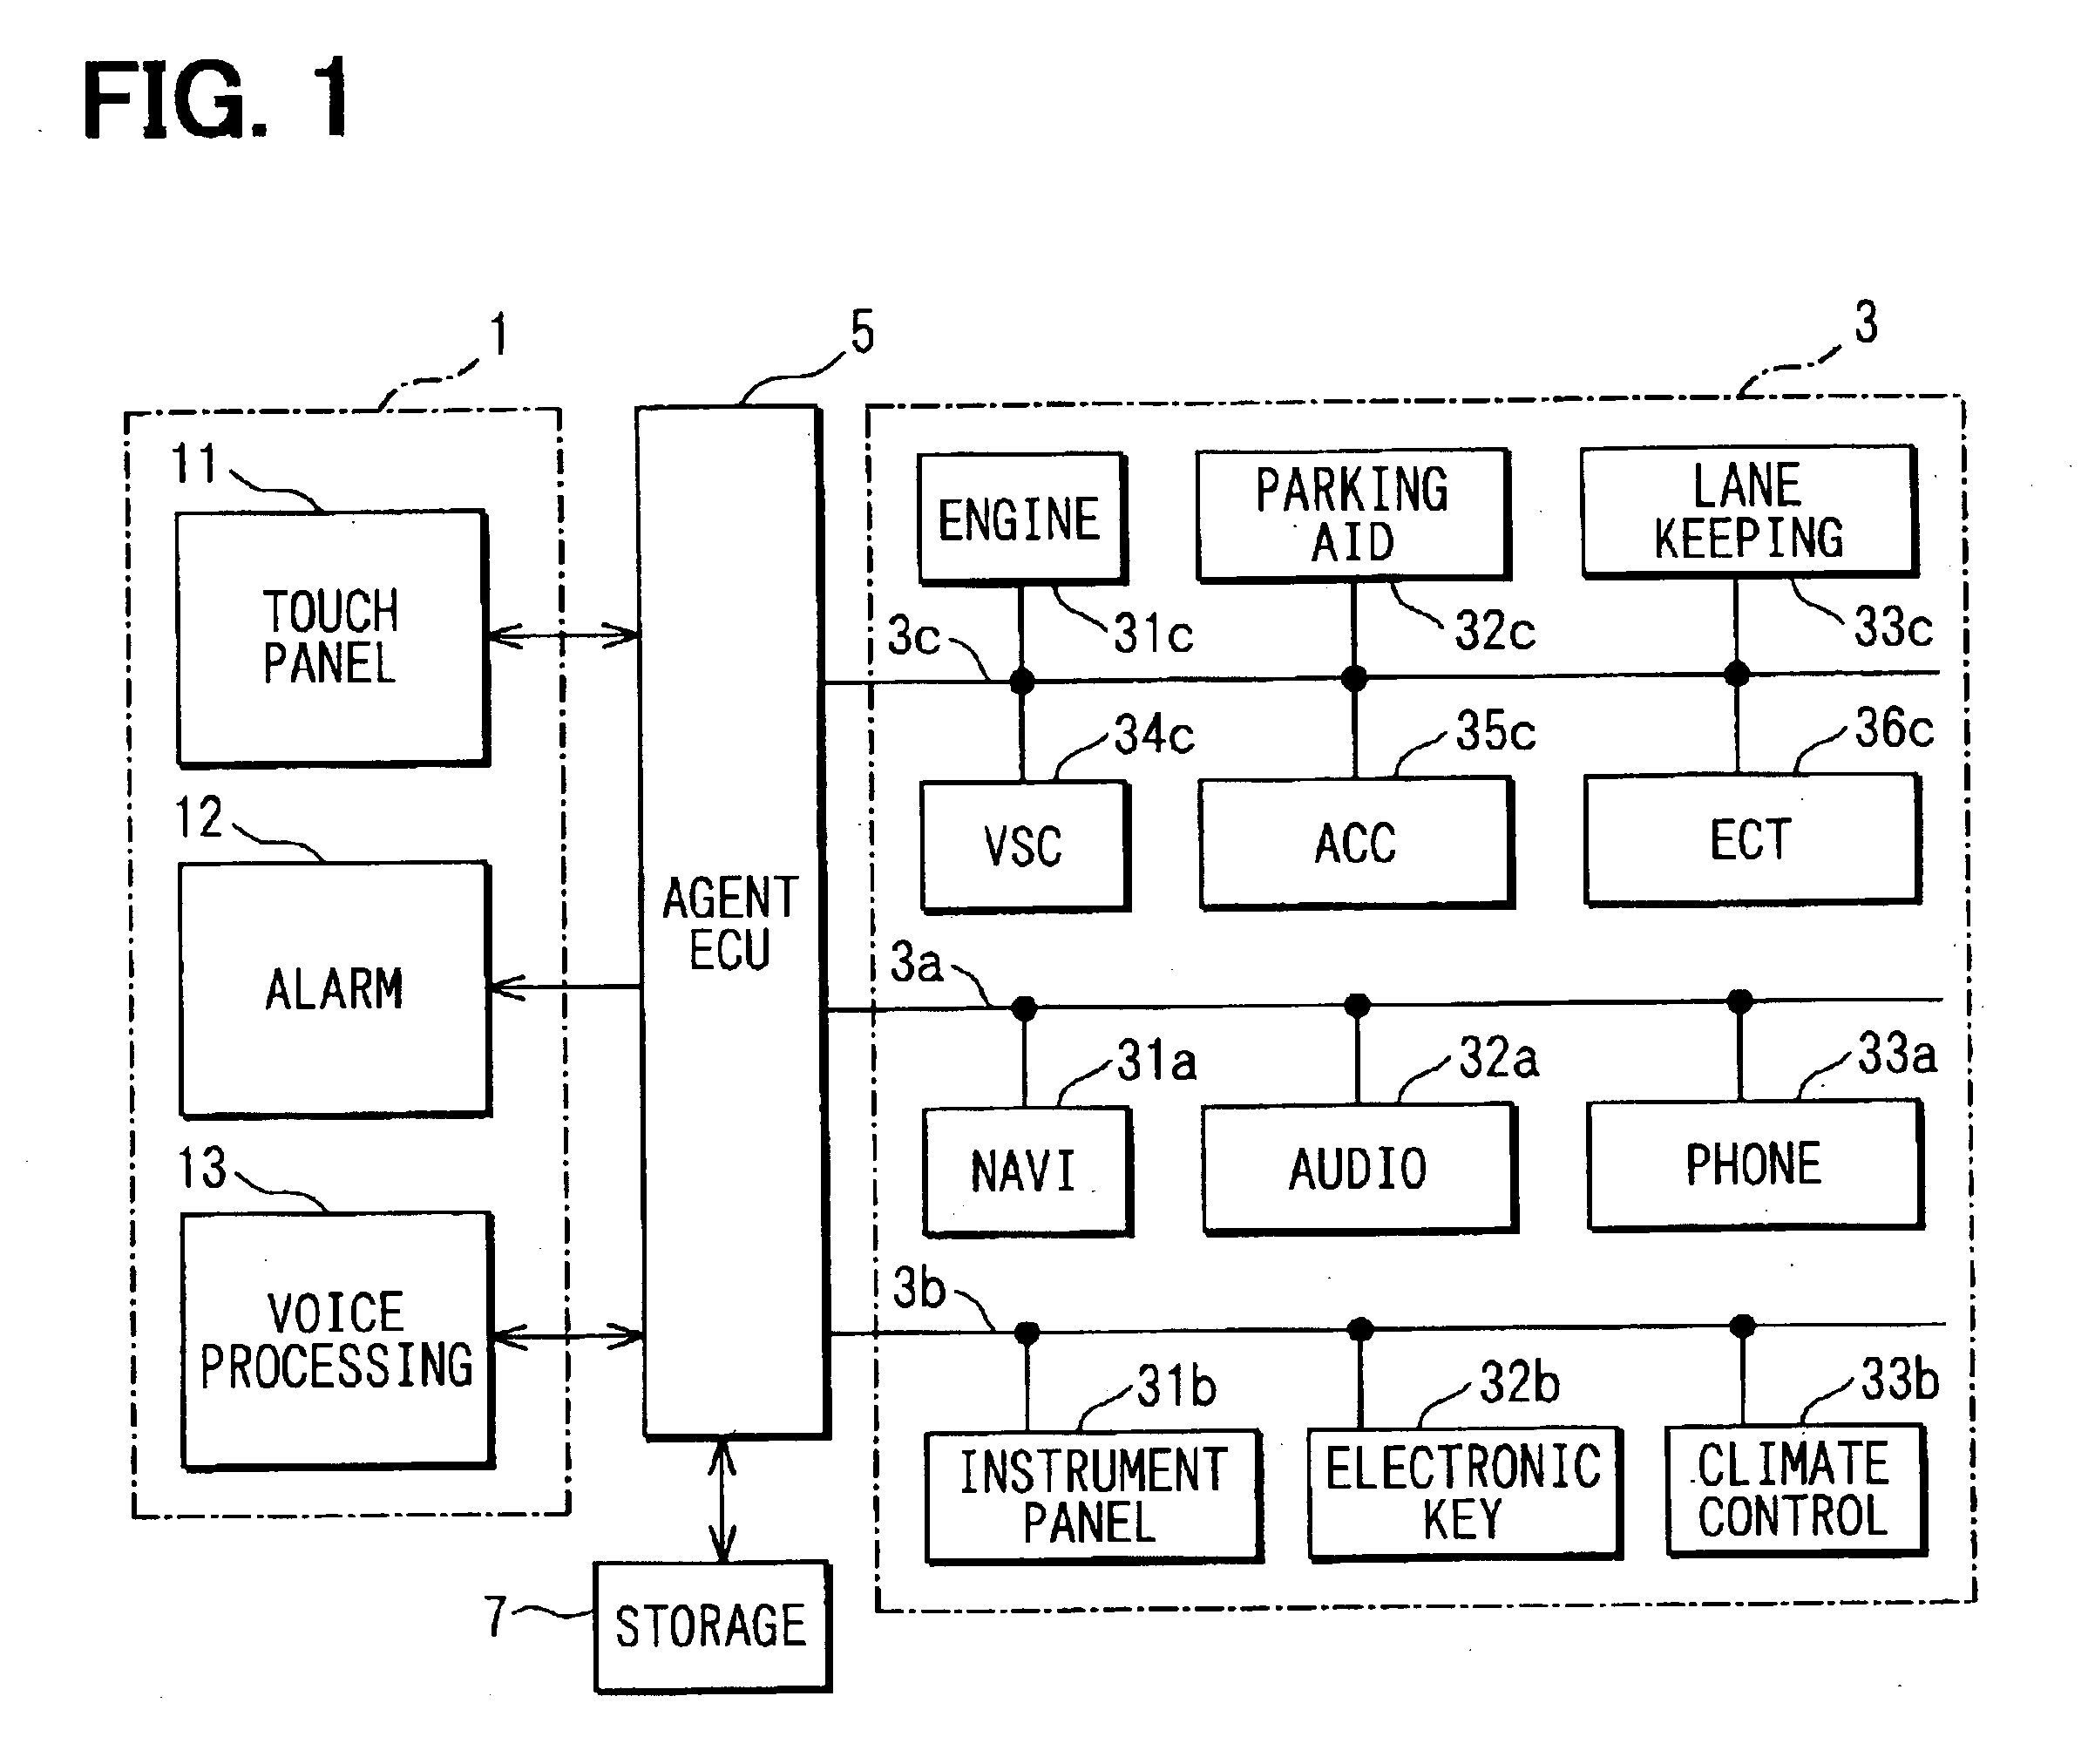 Vehicle agent system acting for driver in controlling in-vehicle devices